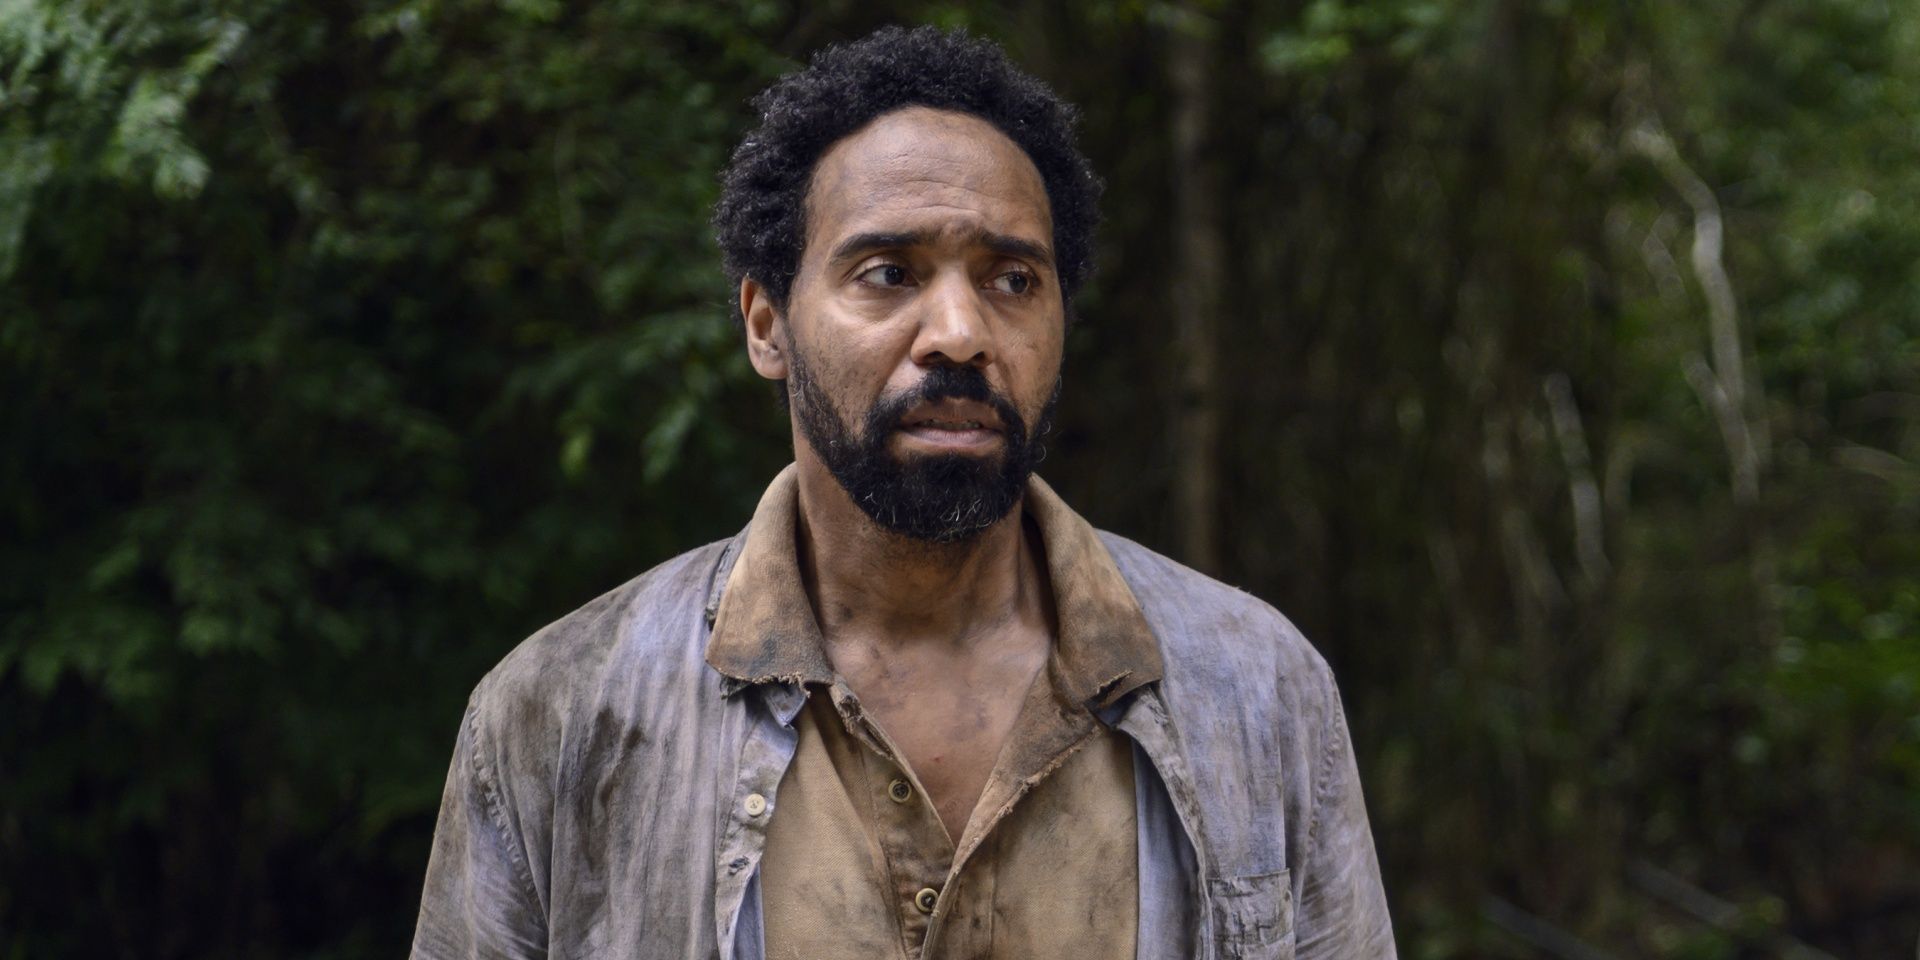 Virgil, a rugged survivor of the zombie apocalypse, stands in the woods in 'The Walking Dead'.